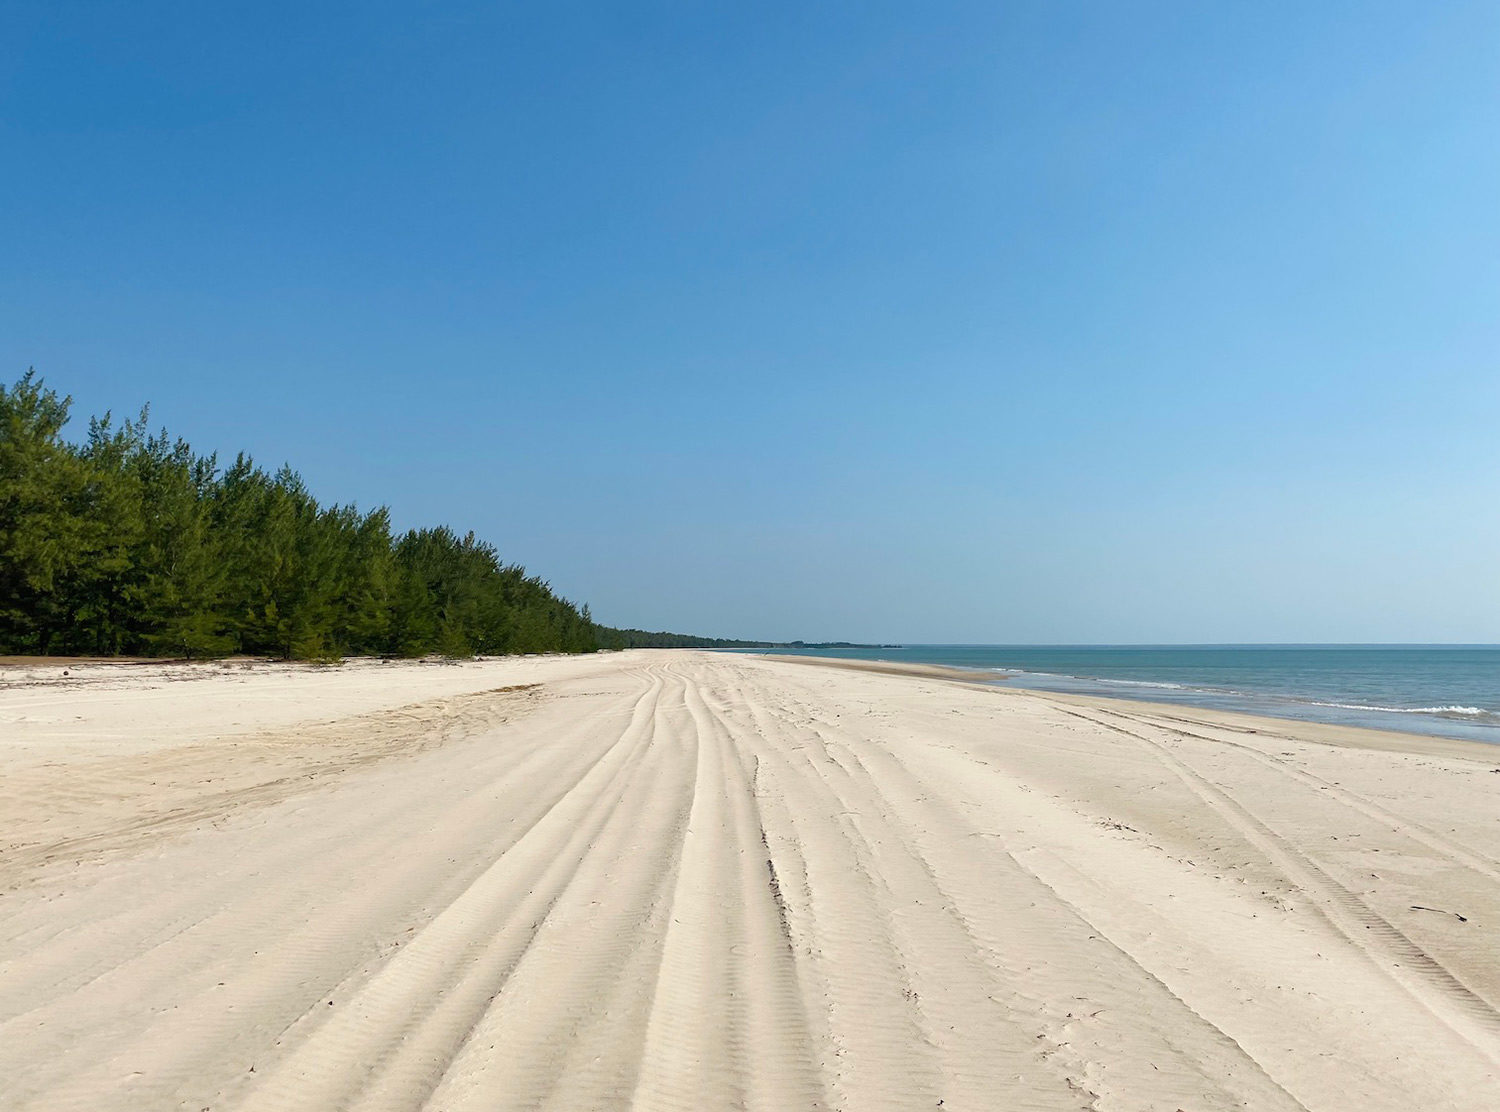 Tiwi Island Retreat Not another person in sight. The empty, beautiful 4 Mile Beach — all yours